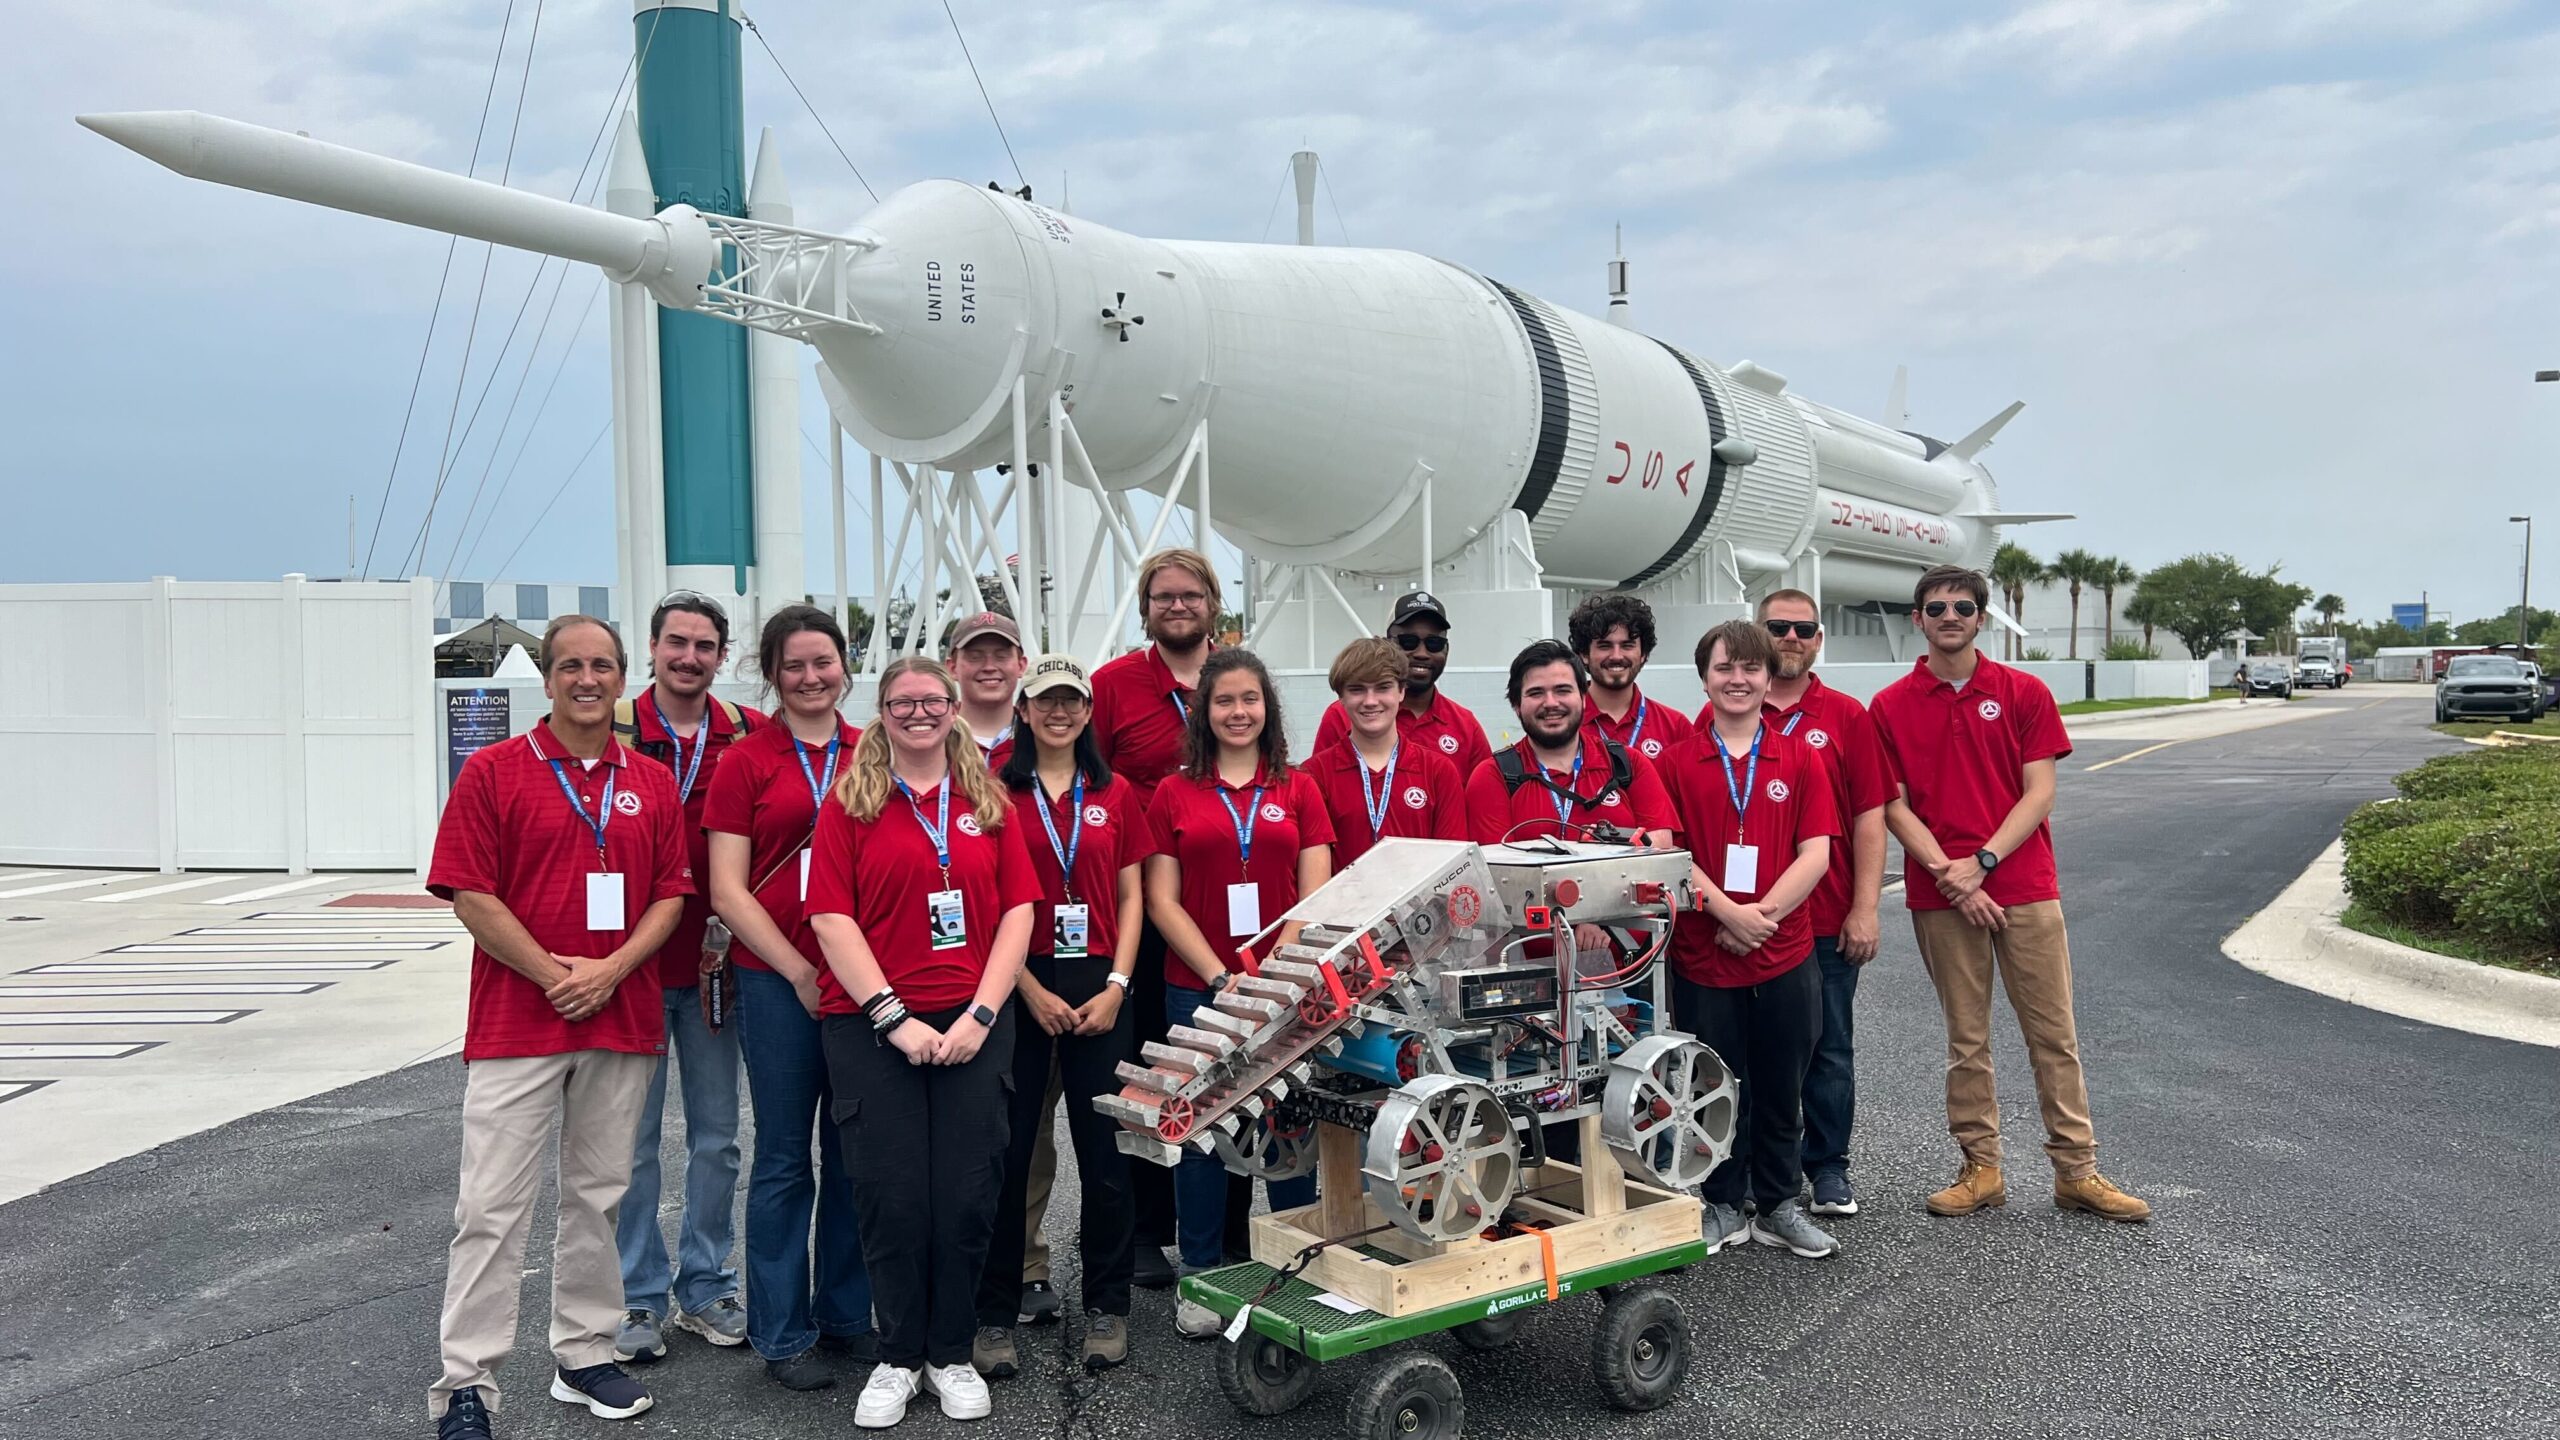 The University of Alabama Astrobotics team stands in front of a rocket with their winning lunar mining rover